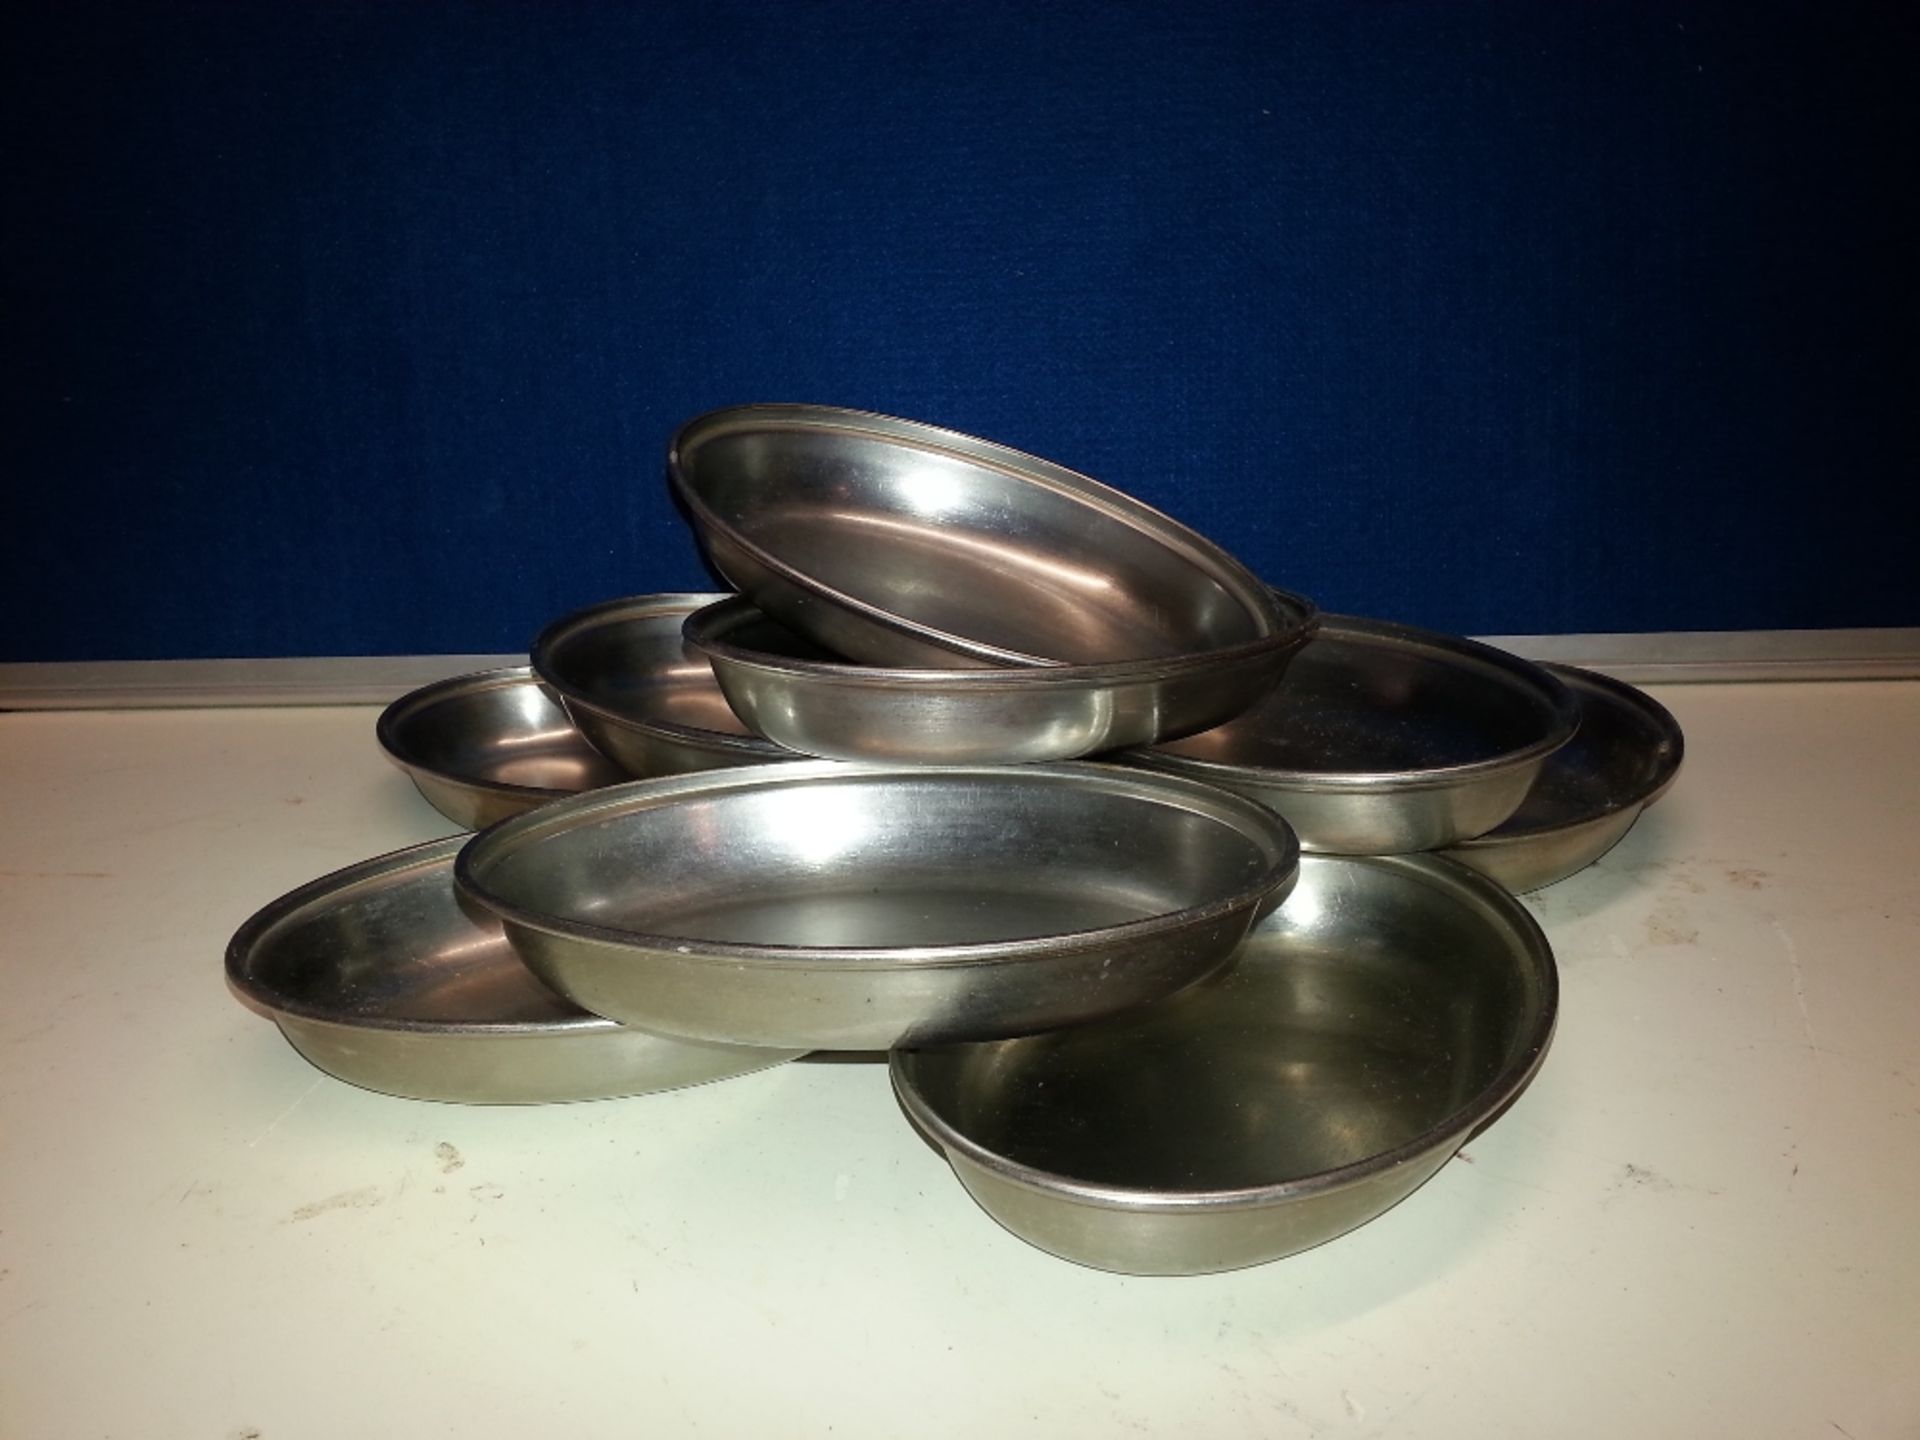 10x Small stainless steel oval dishes